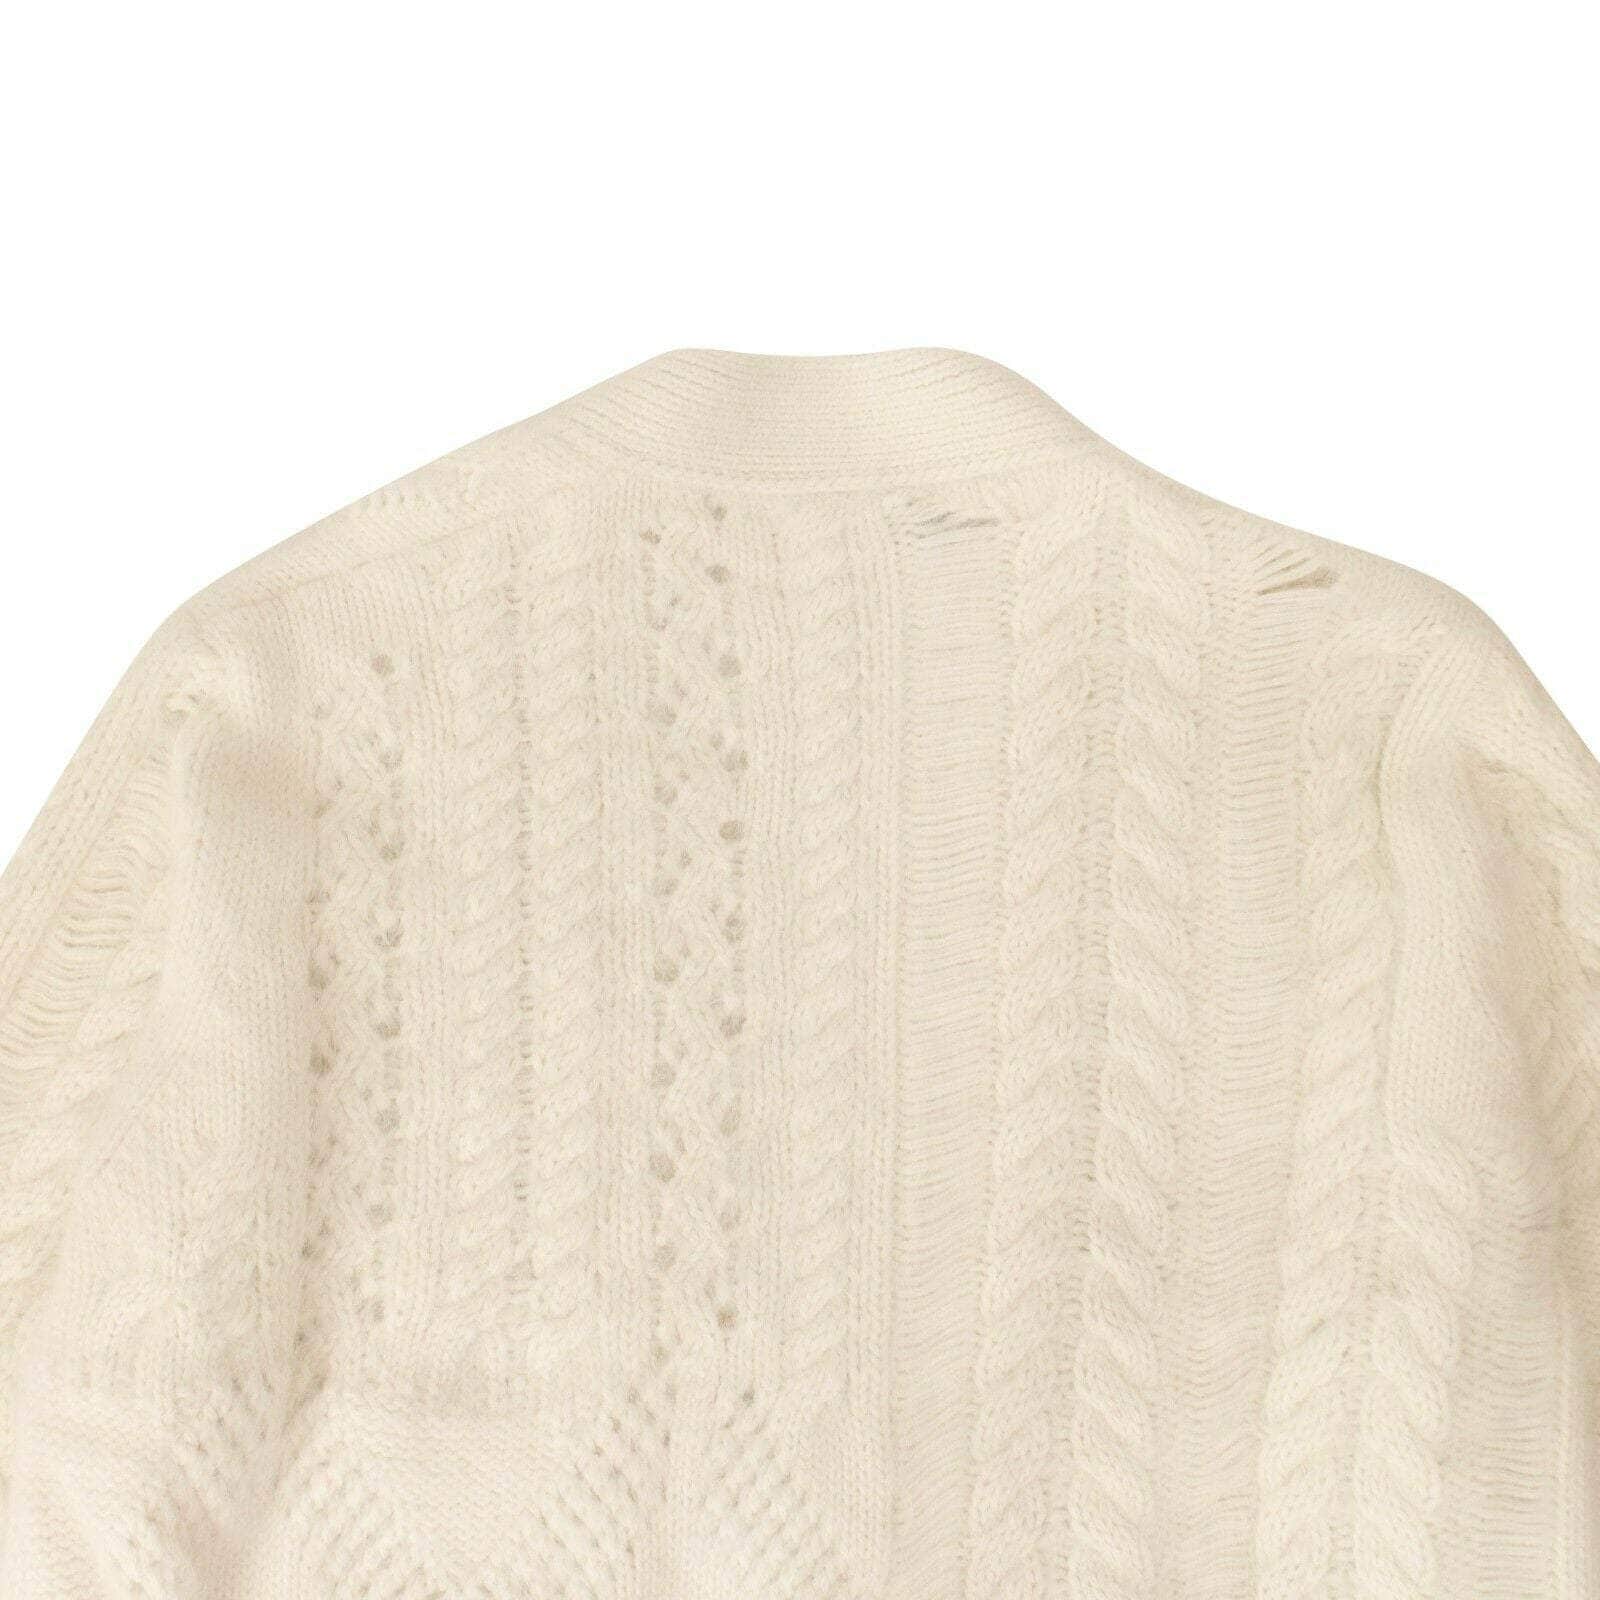 Amiri 500-750, amiri, AMR, AWC1, channelenable-all, chicmi, couponcollection, gender-womens, main-clothing, size-s, size-xs, SPO, womens-cardigans Women's Cream Amiri Angora Multipoint Cardigan